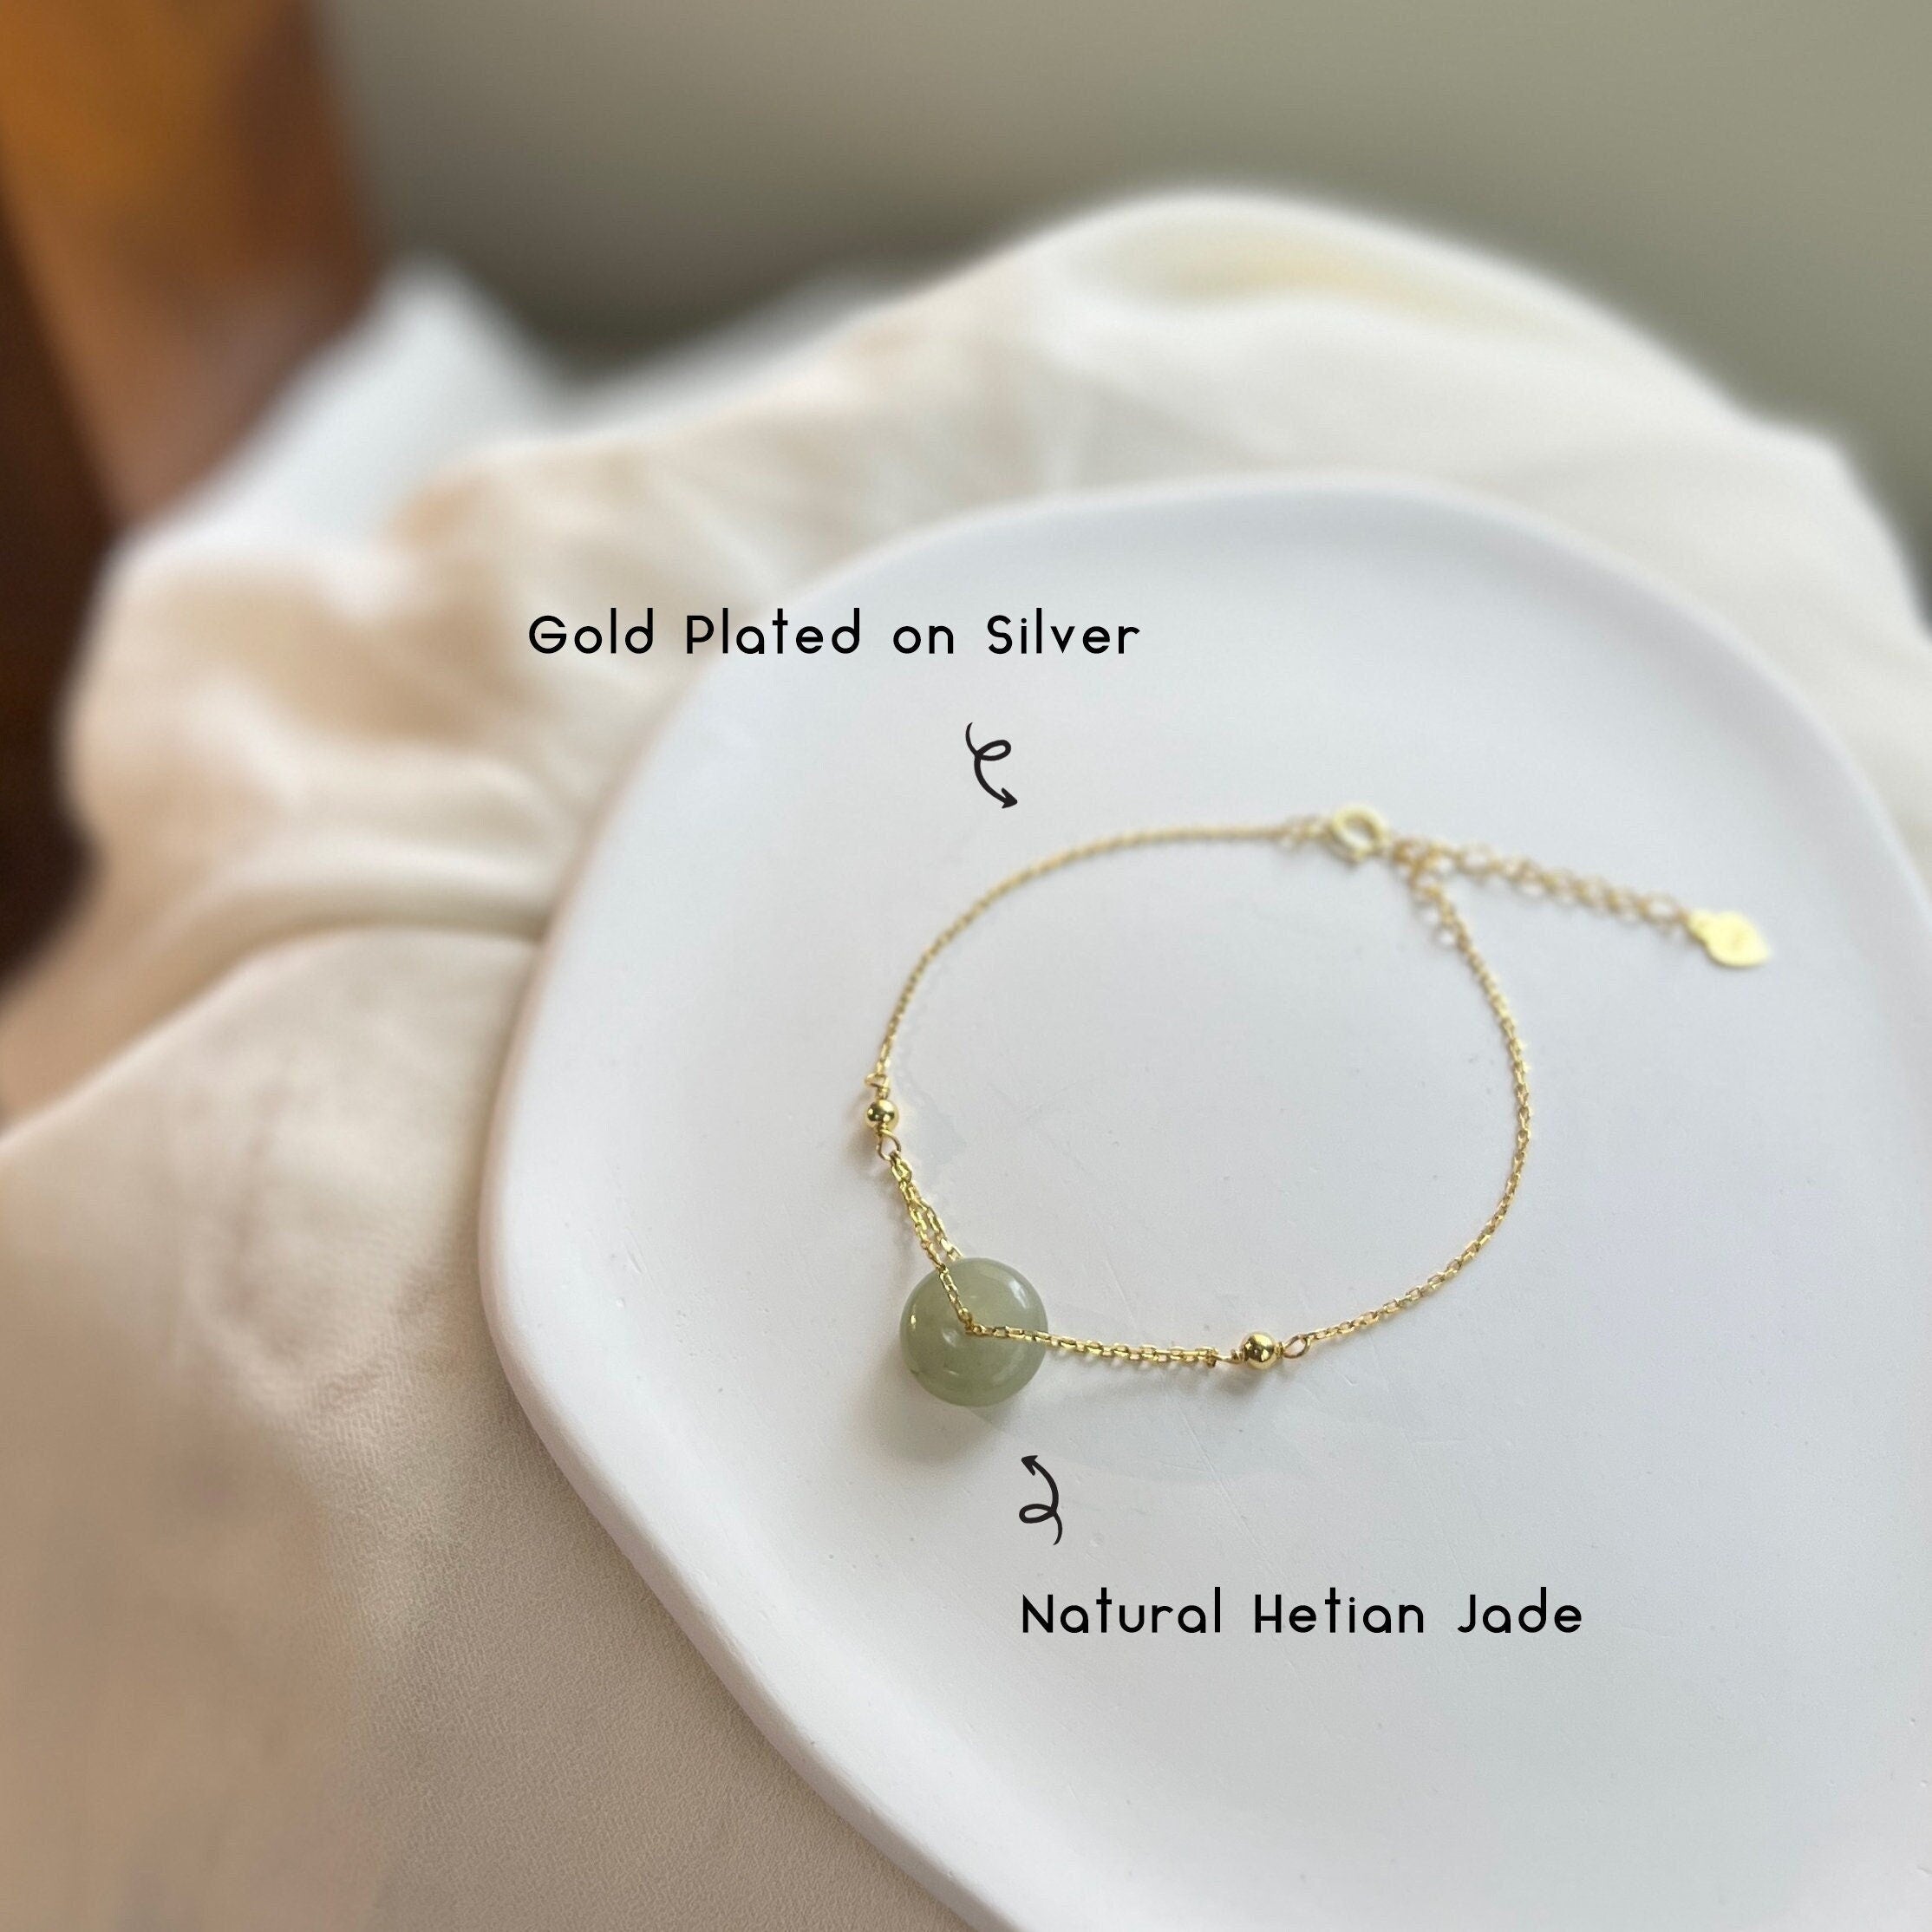 Exquisite Designer Bracelets: Van Cleef, Red Agate, Jade And Gold Bracelet,  Chalcedony, And Five Girl Color Handpiece For Lucky Live Events From  Logofashion, $1.01 | DHgate.Com